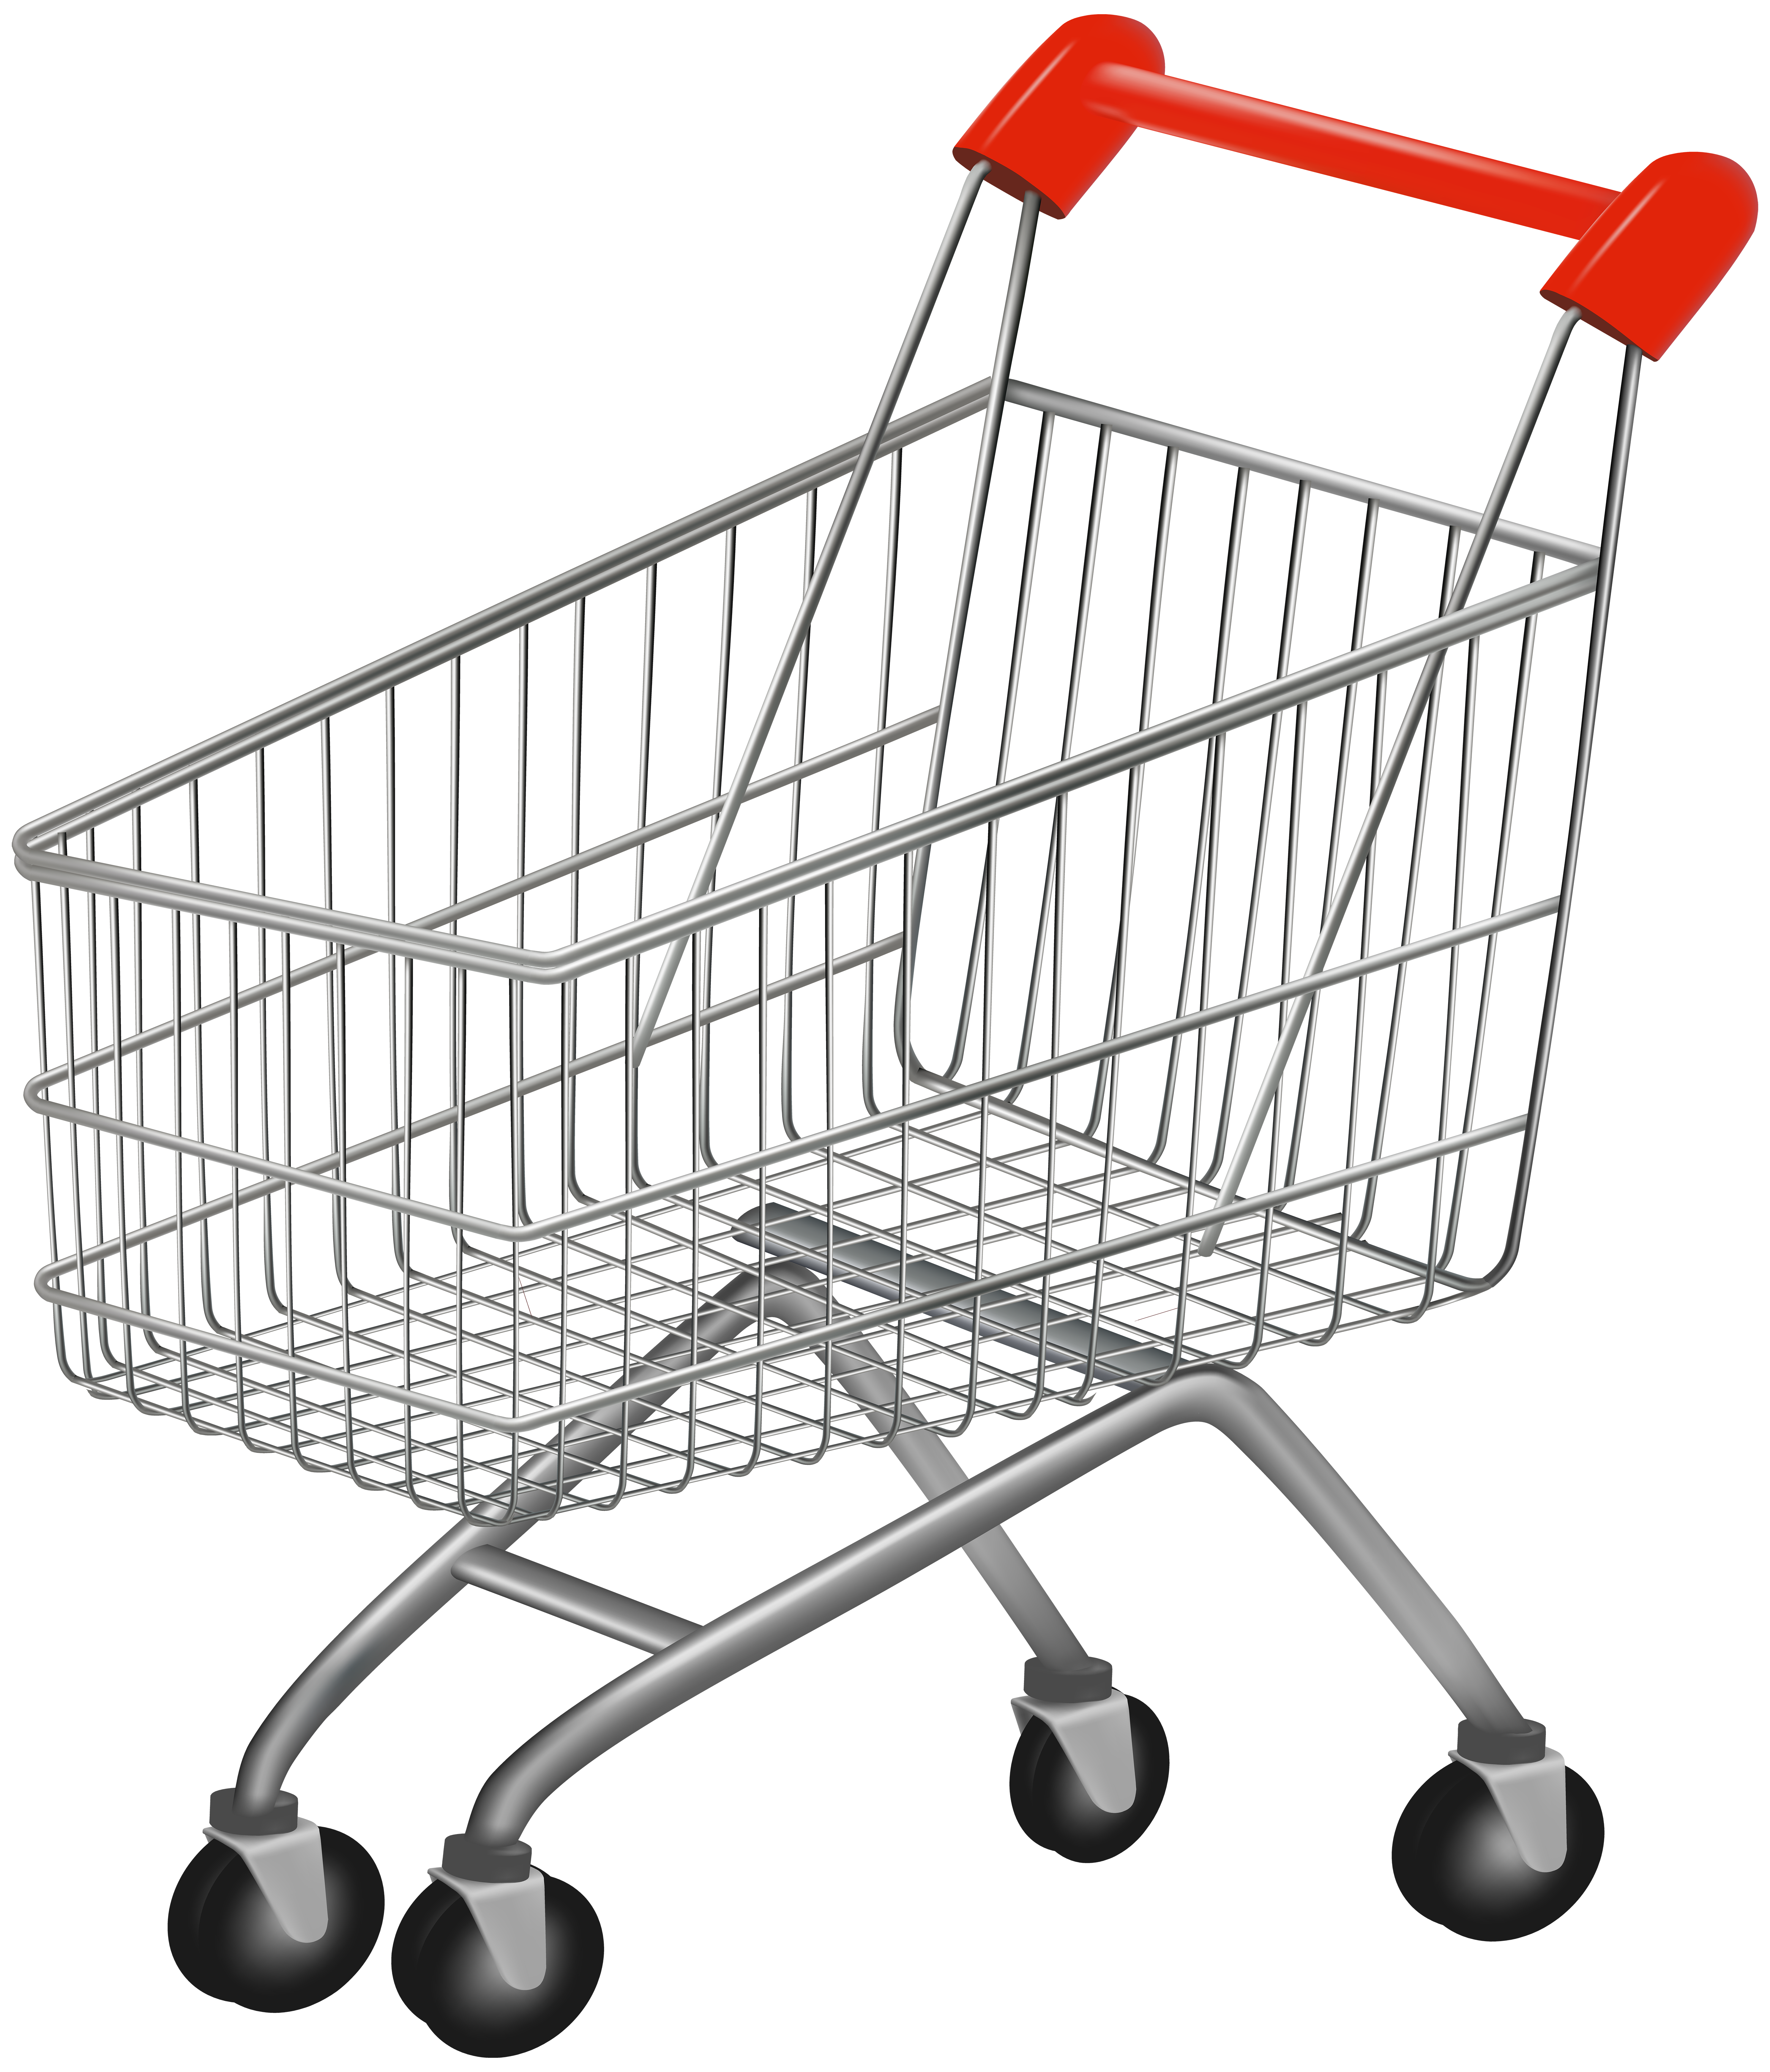 full grocery cart clipart